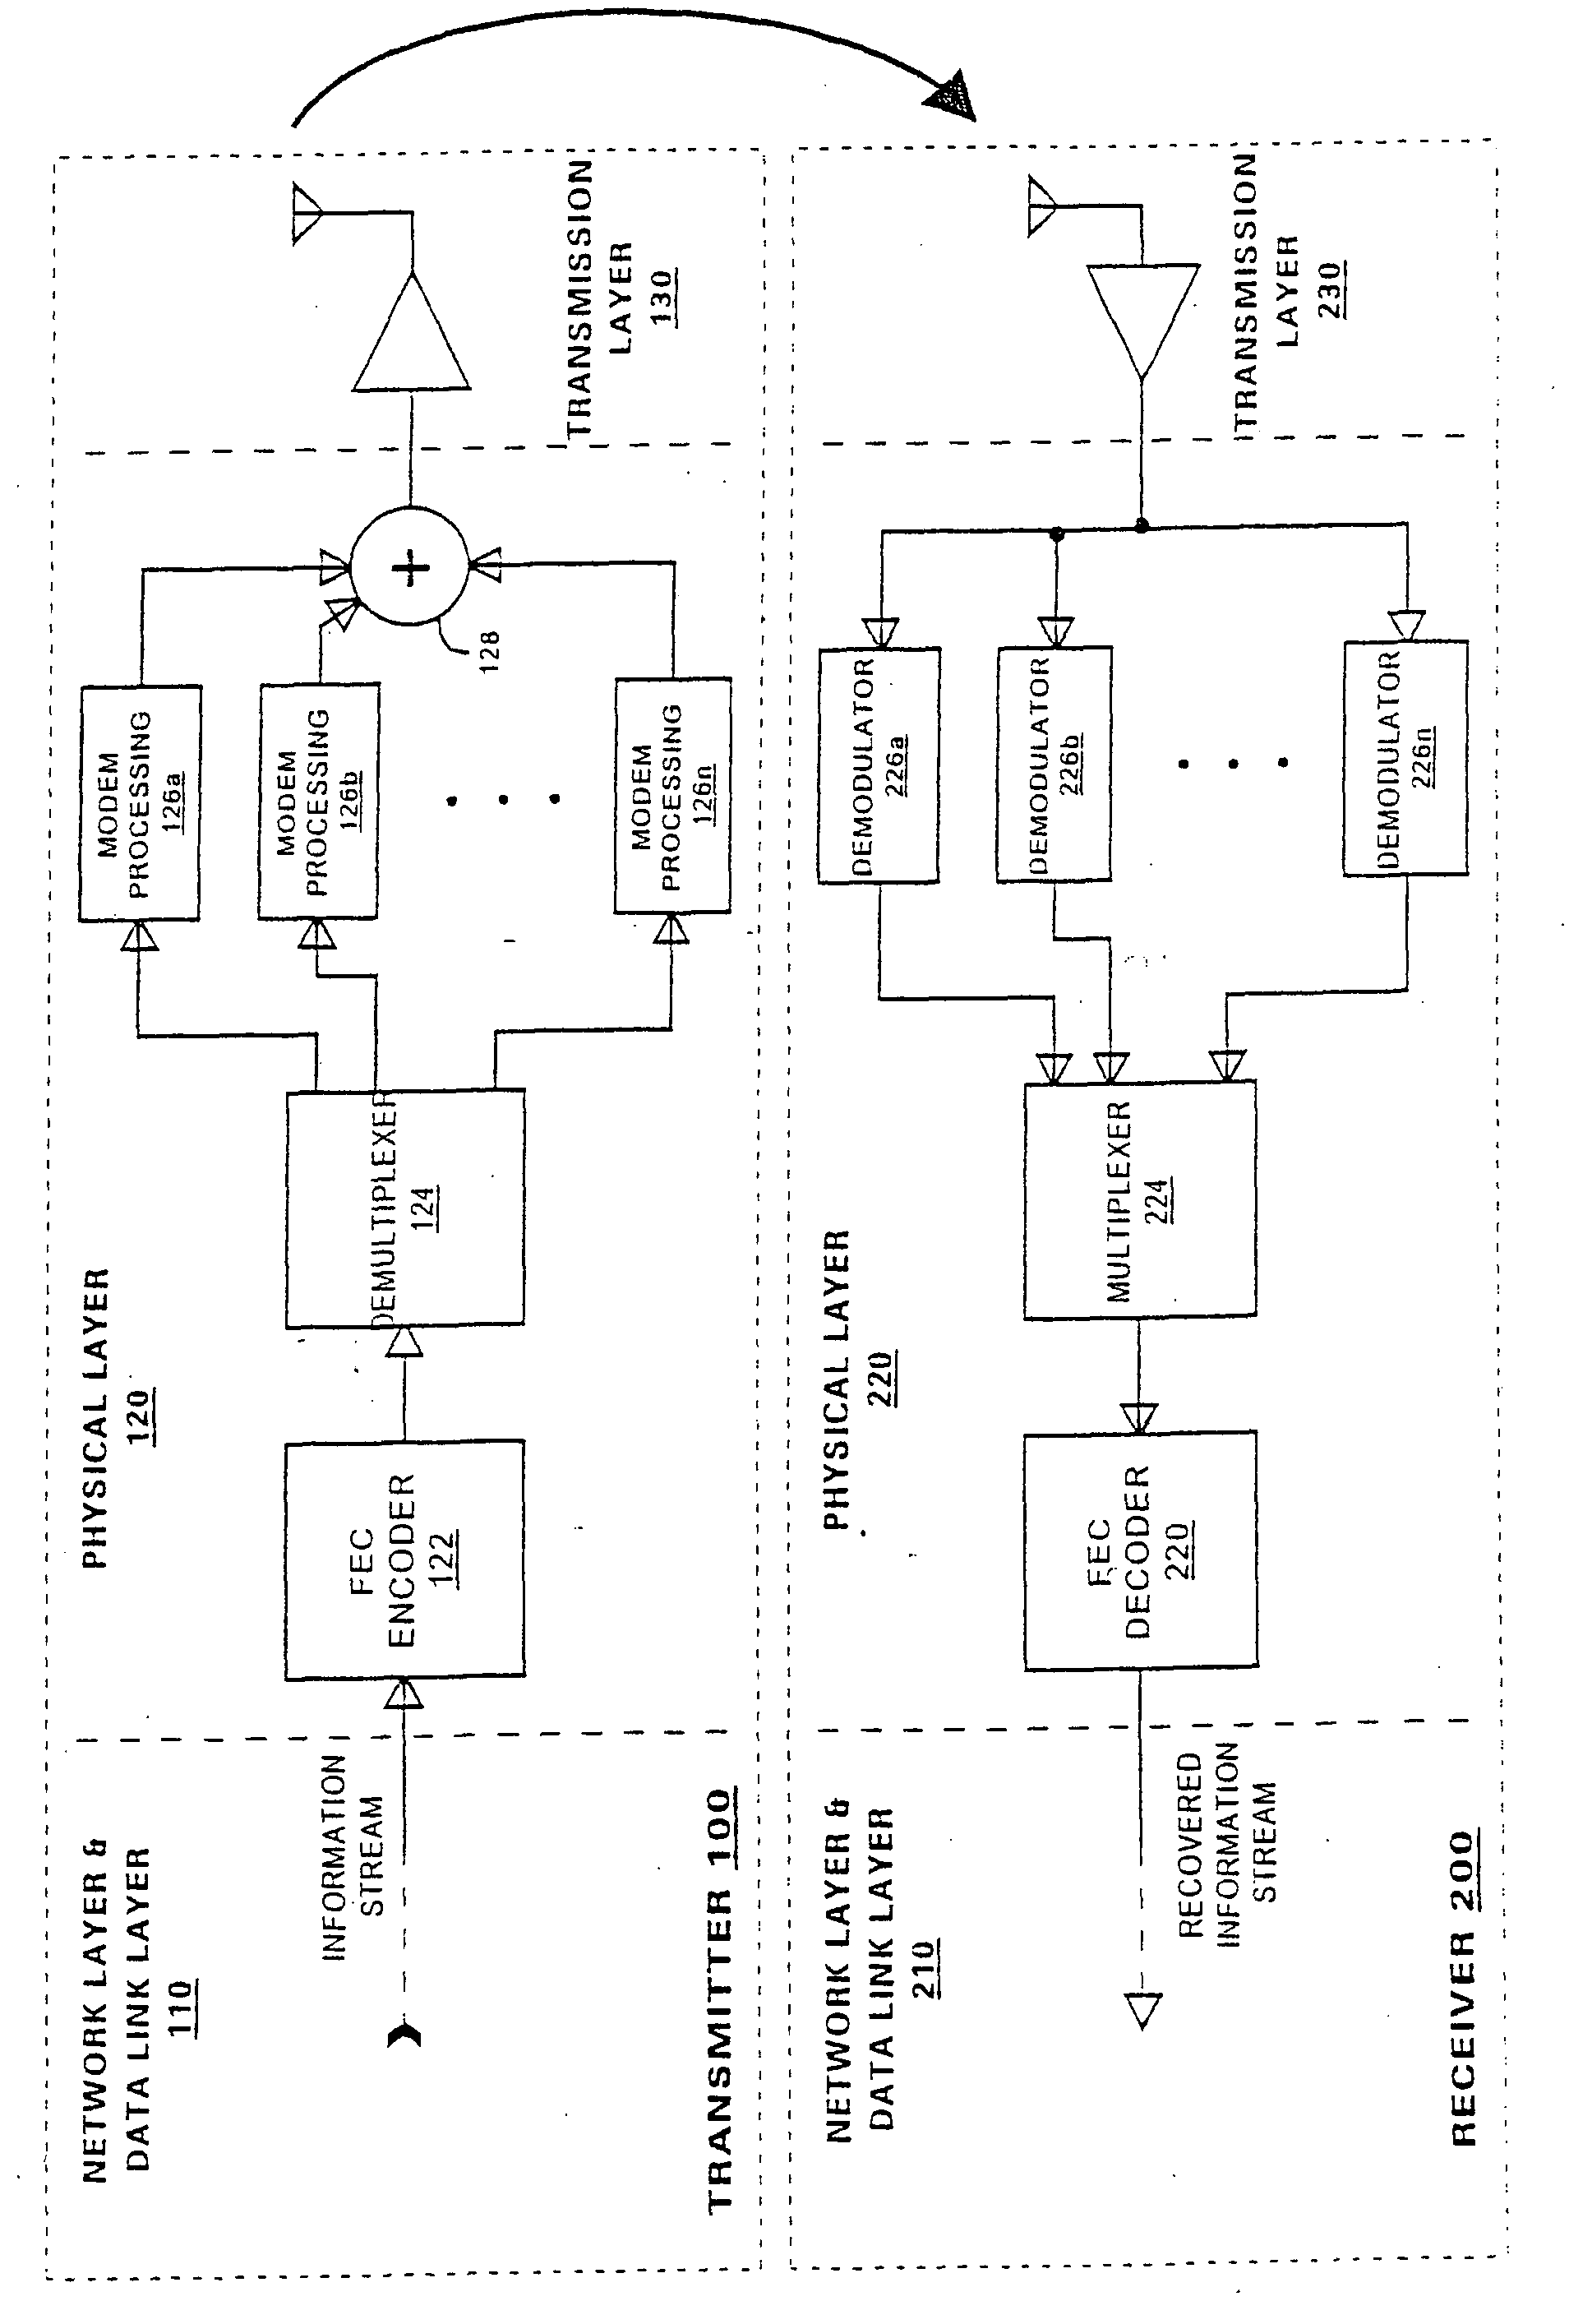 Forward error correction scheme for high rate data exchange in a wireless system